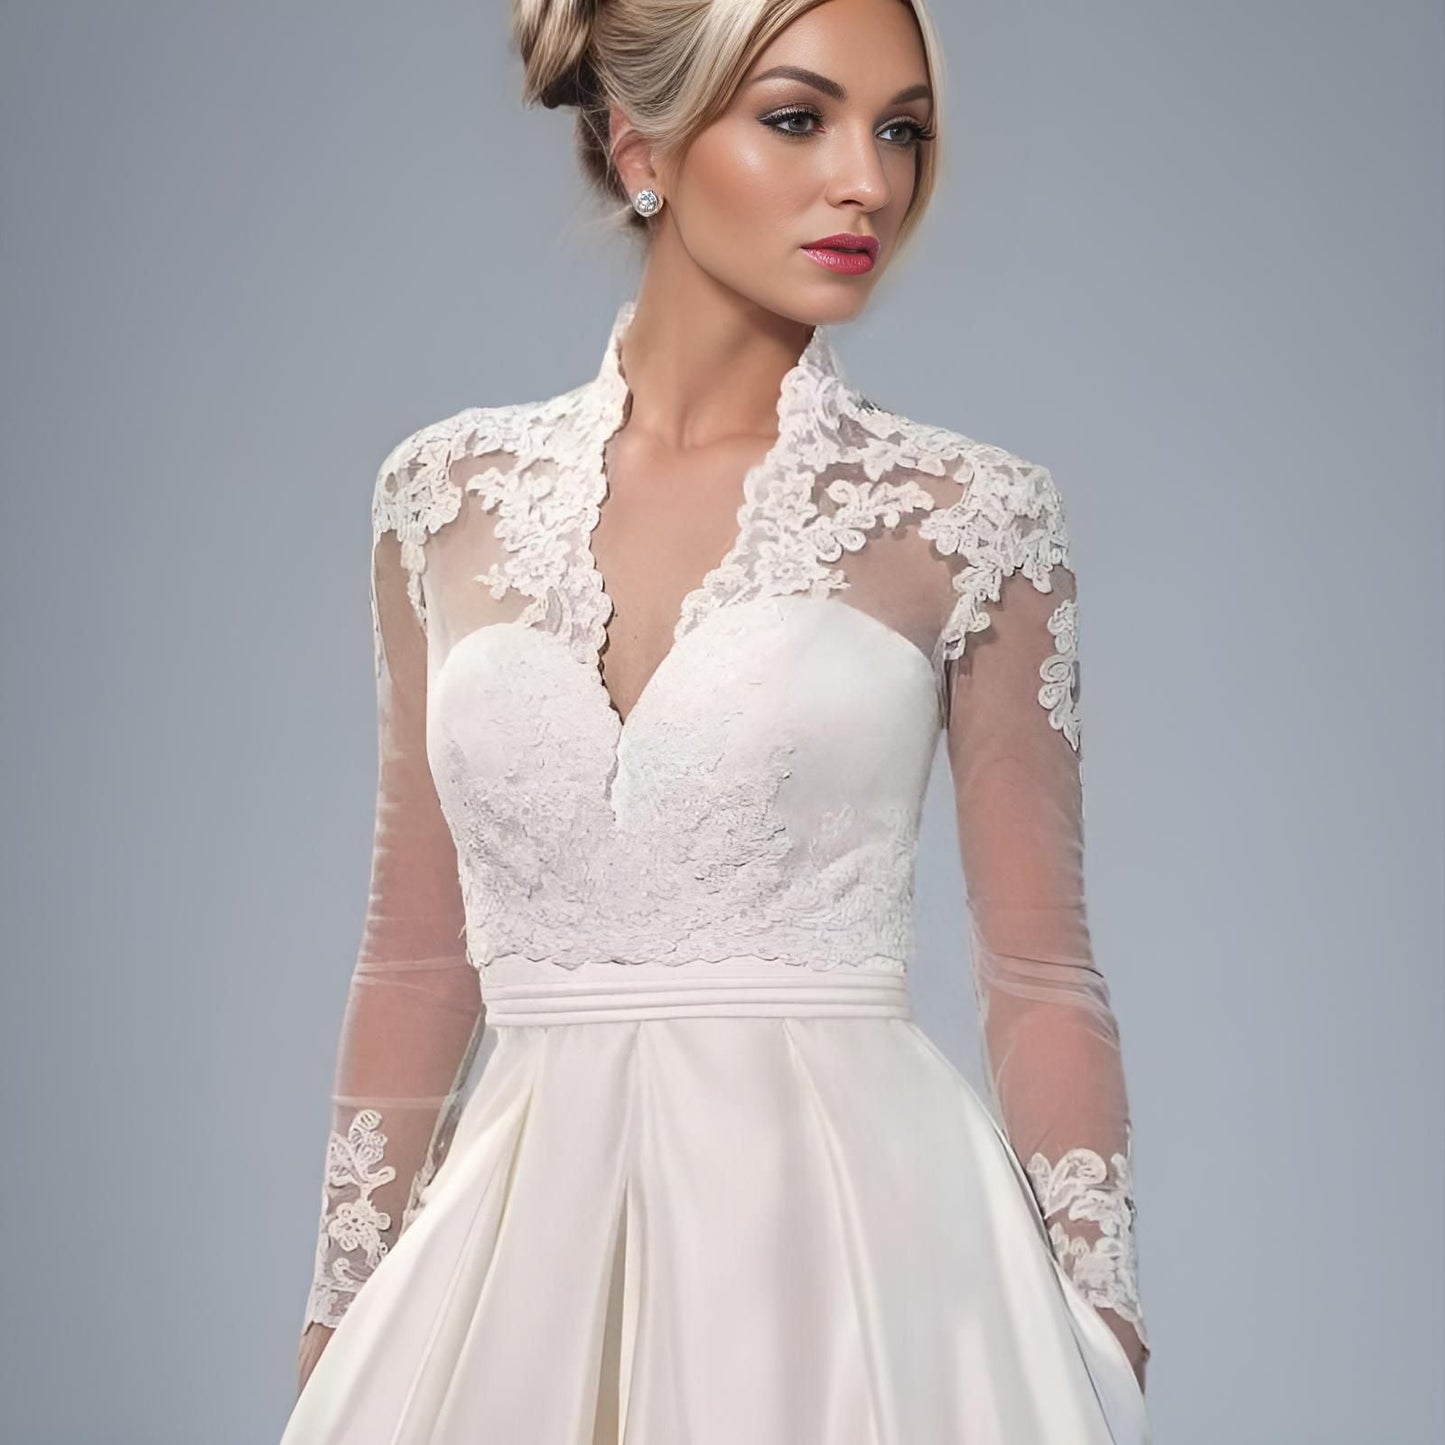 Bridal Lace Jacket with Long Sleeves